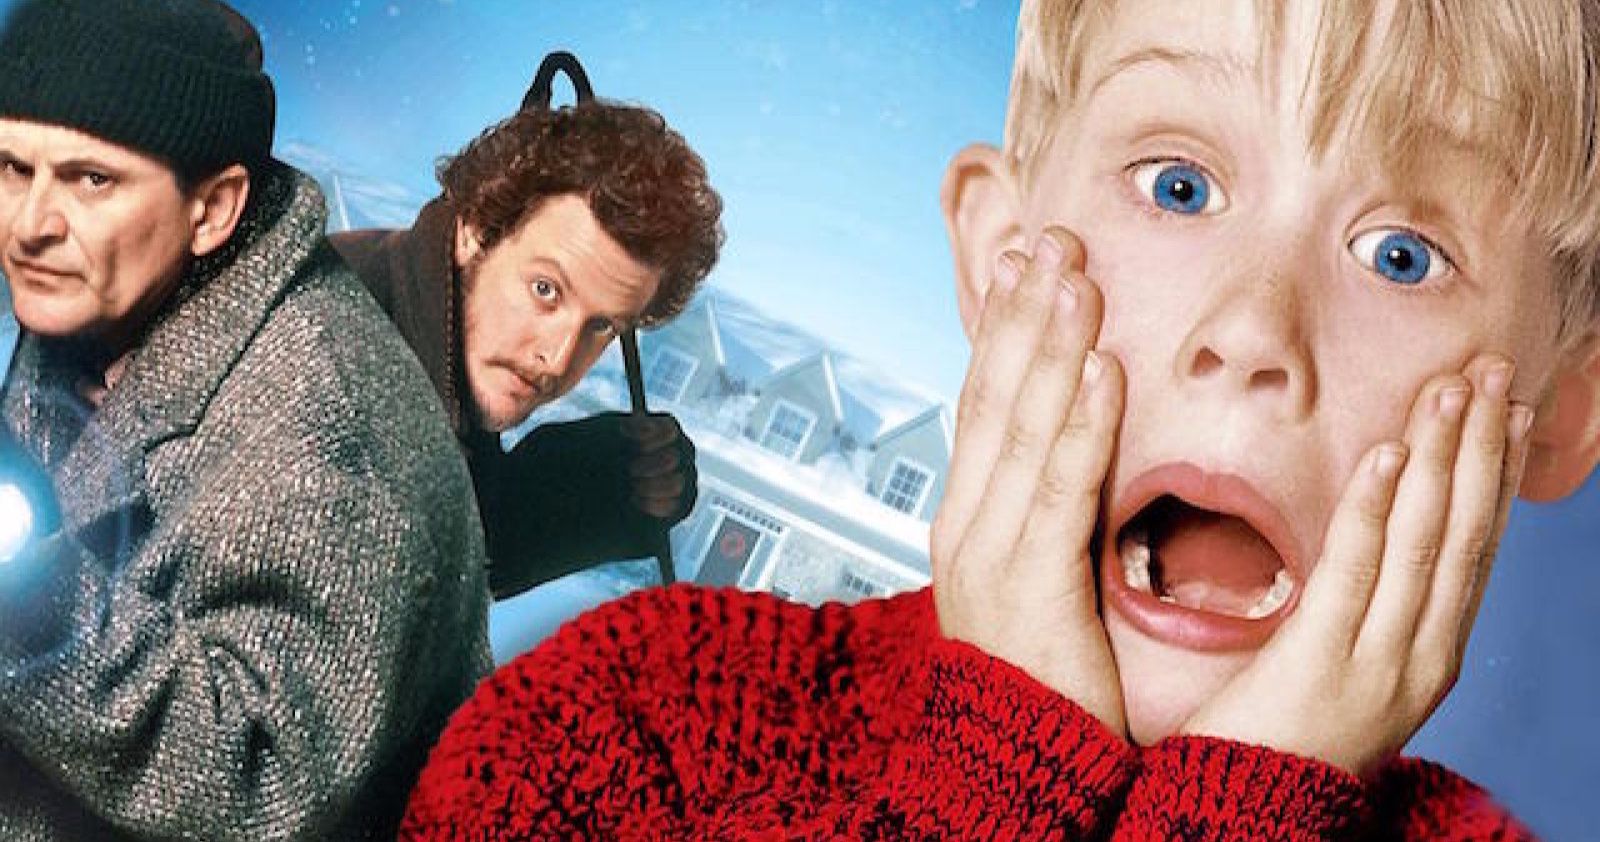 Original Home Alone Director Thinks Disney+ Reboot Is a Waste of Time